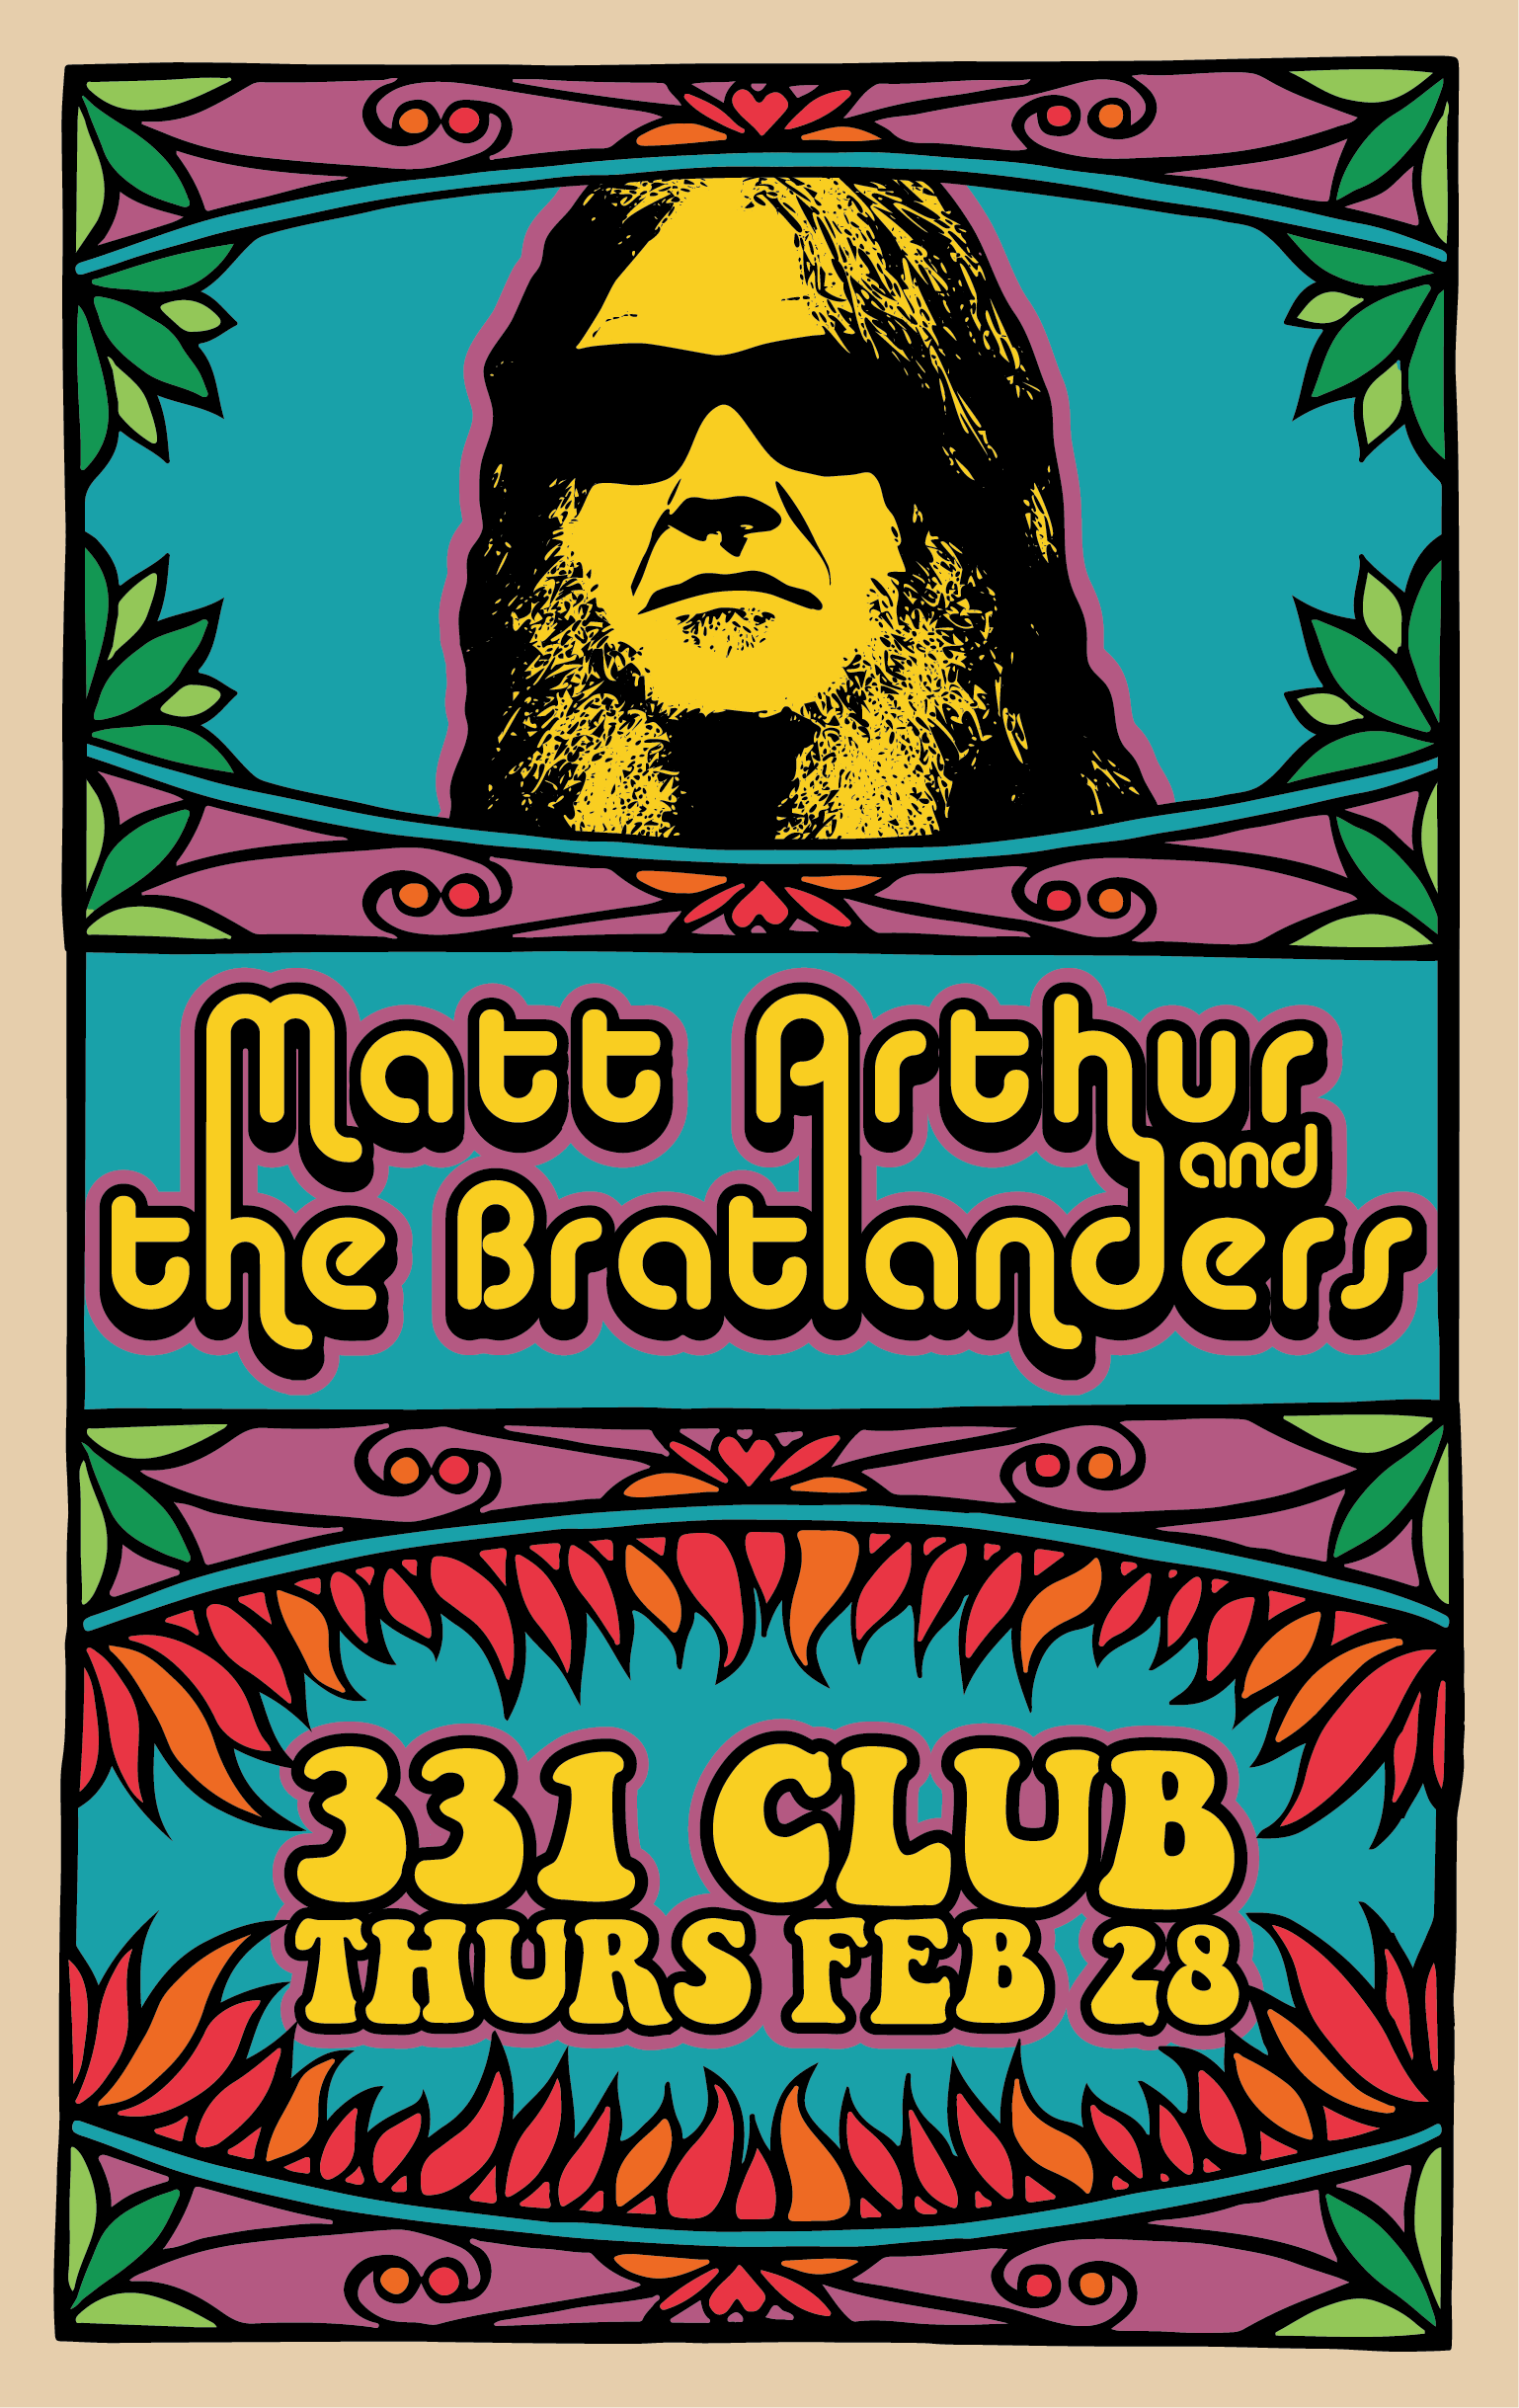 Psychedelic poster promoting Bratlanders at the 331 Club, Thurs. Feb. 28